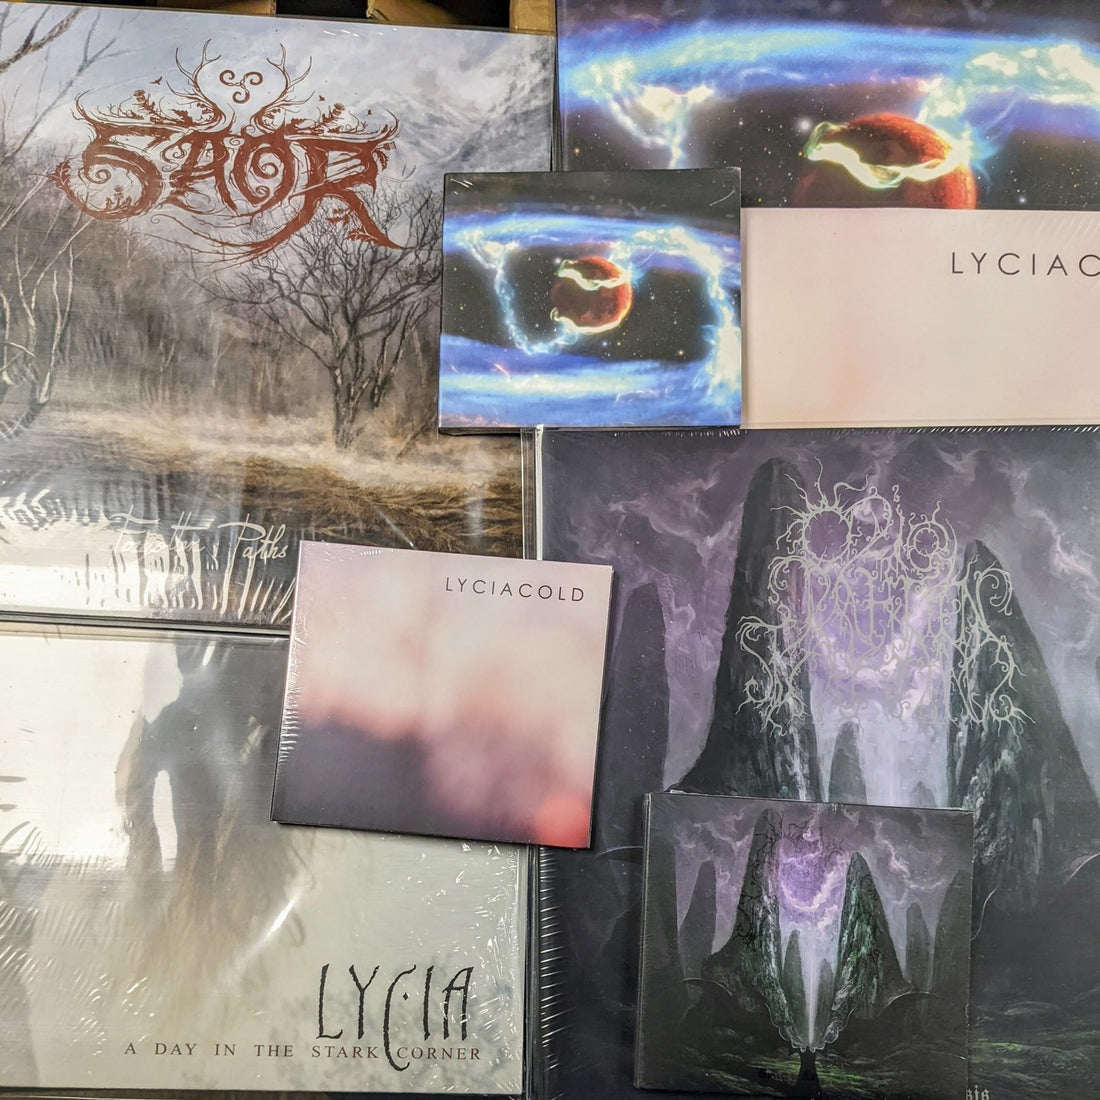 New darkwave and black metal arrivals now in stock